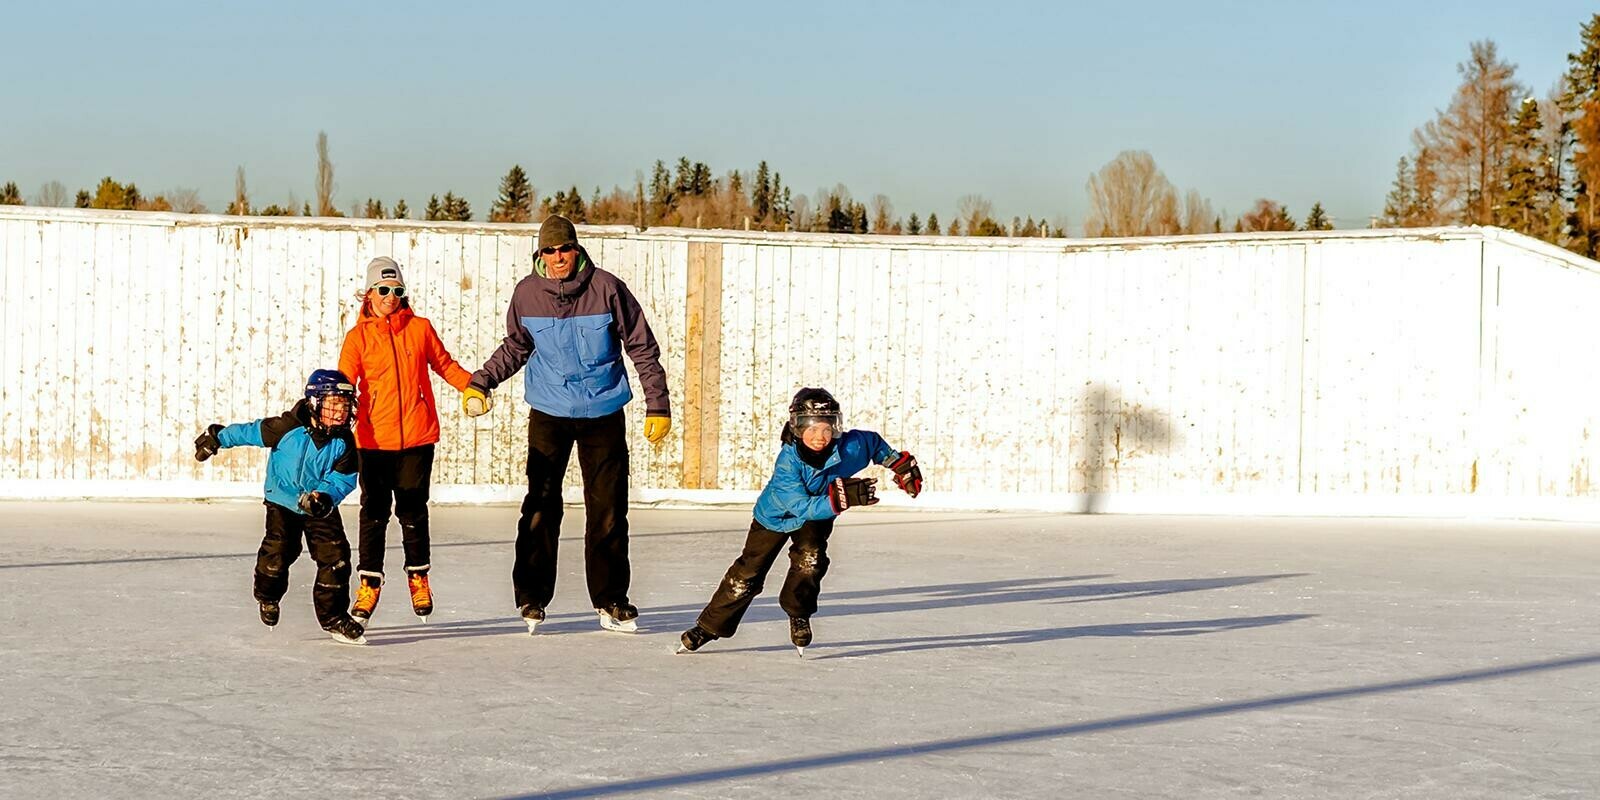 Family skating on outdoor rink